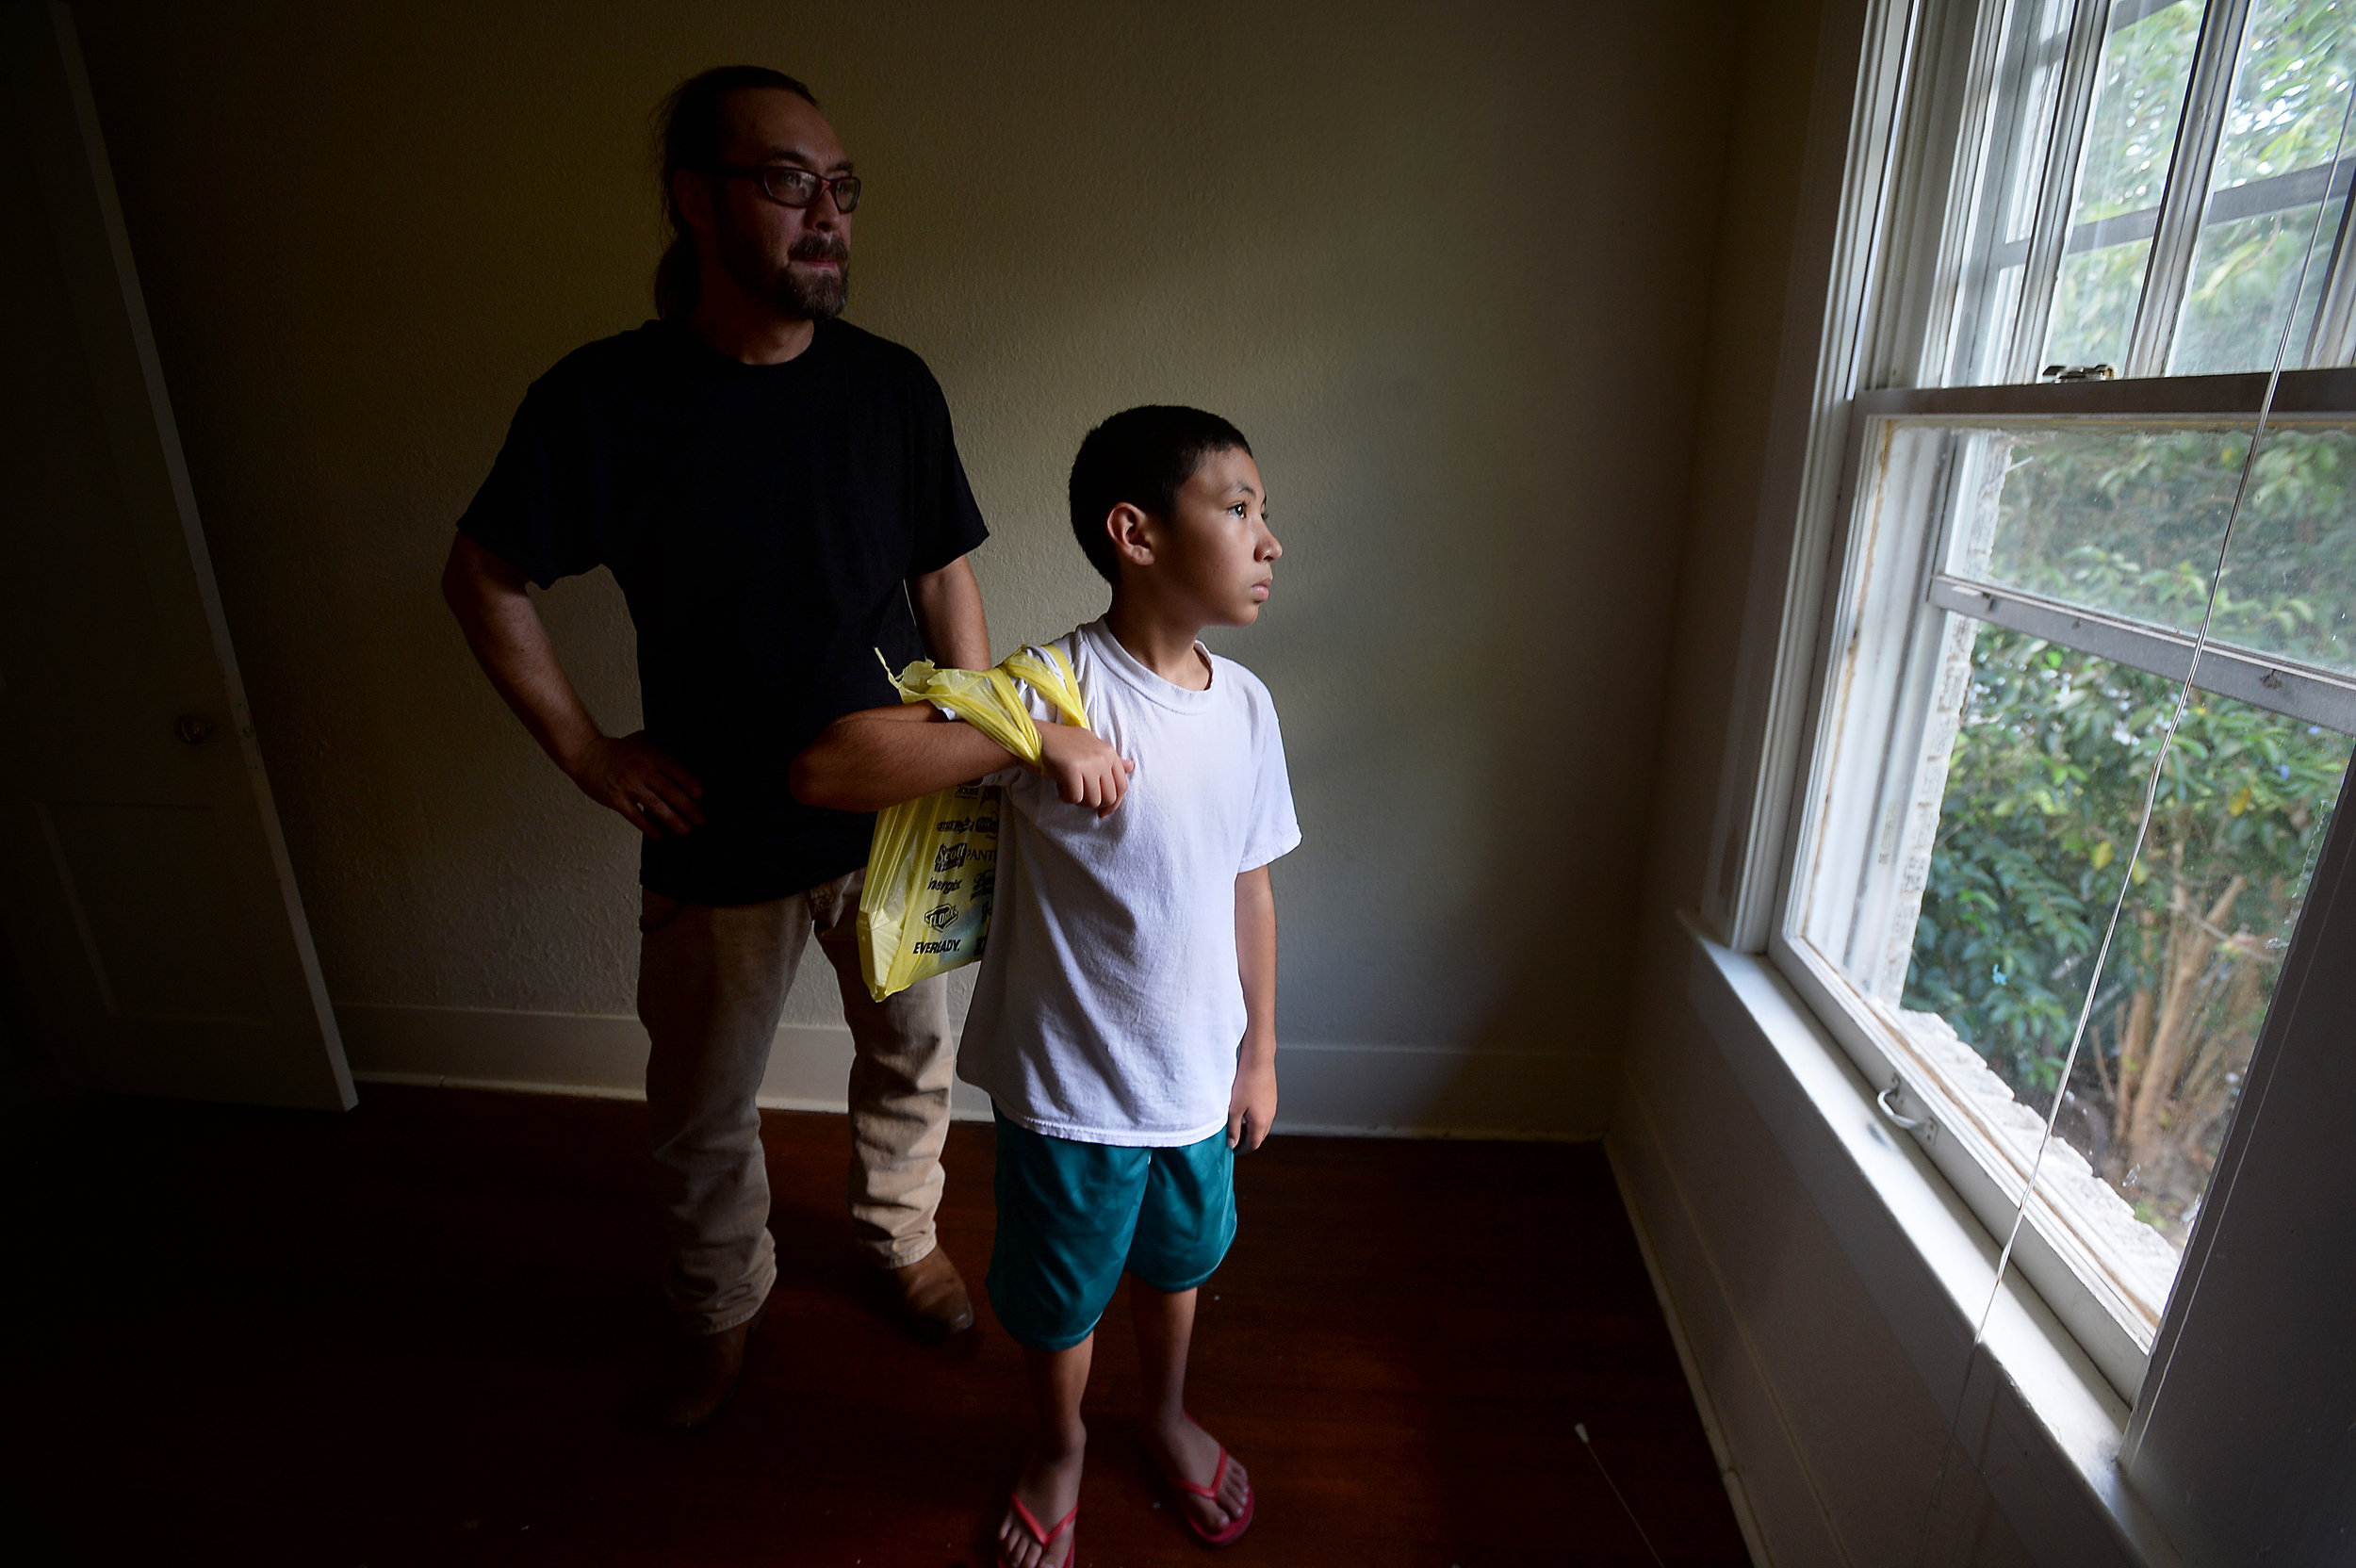  Steven and Steven Kaufman, Jr., stare out the window of an upstairs bedroom as they make a stop at their soon-to-be new home in Old Town. With their FEMA hotel voucher extension due to expire, the Kaufman's were able to find and secure an apartment 